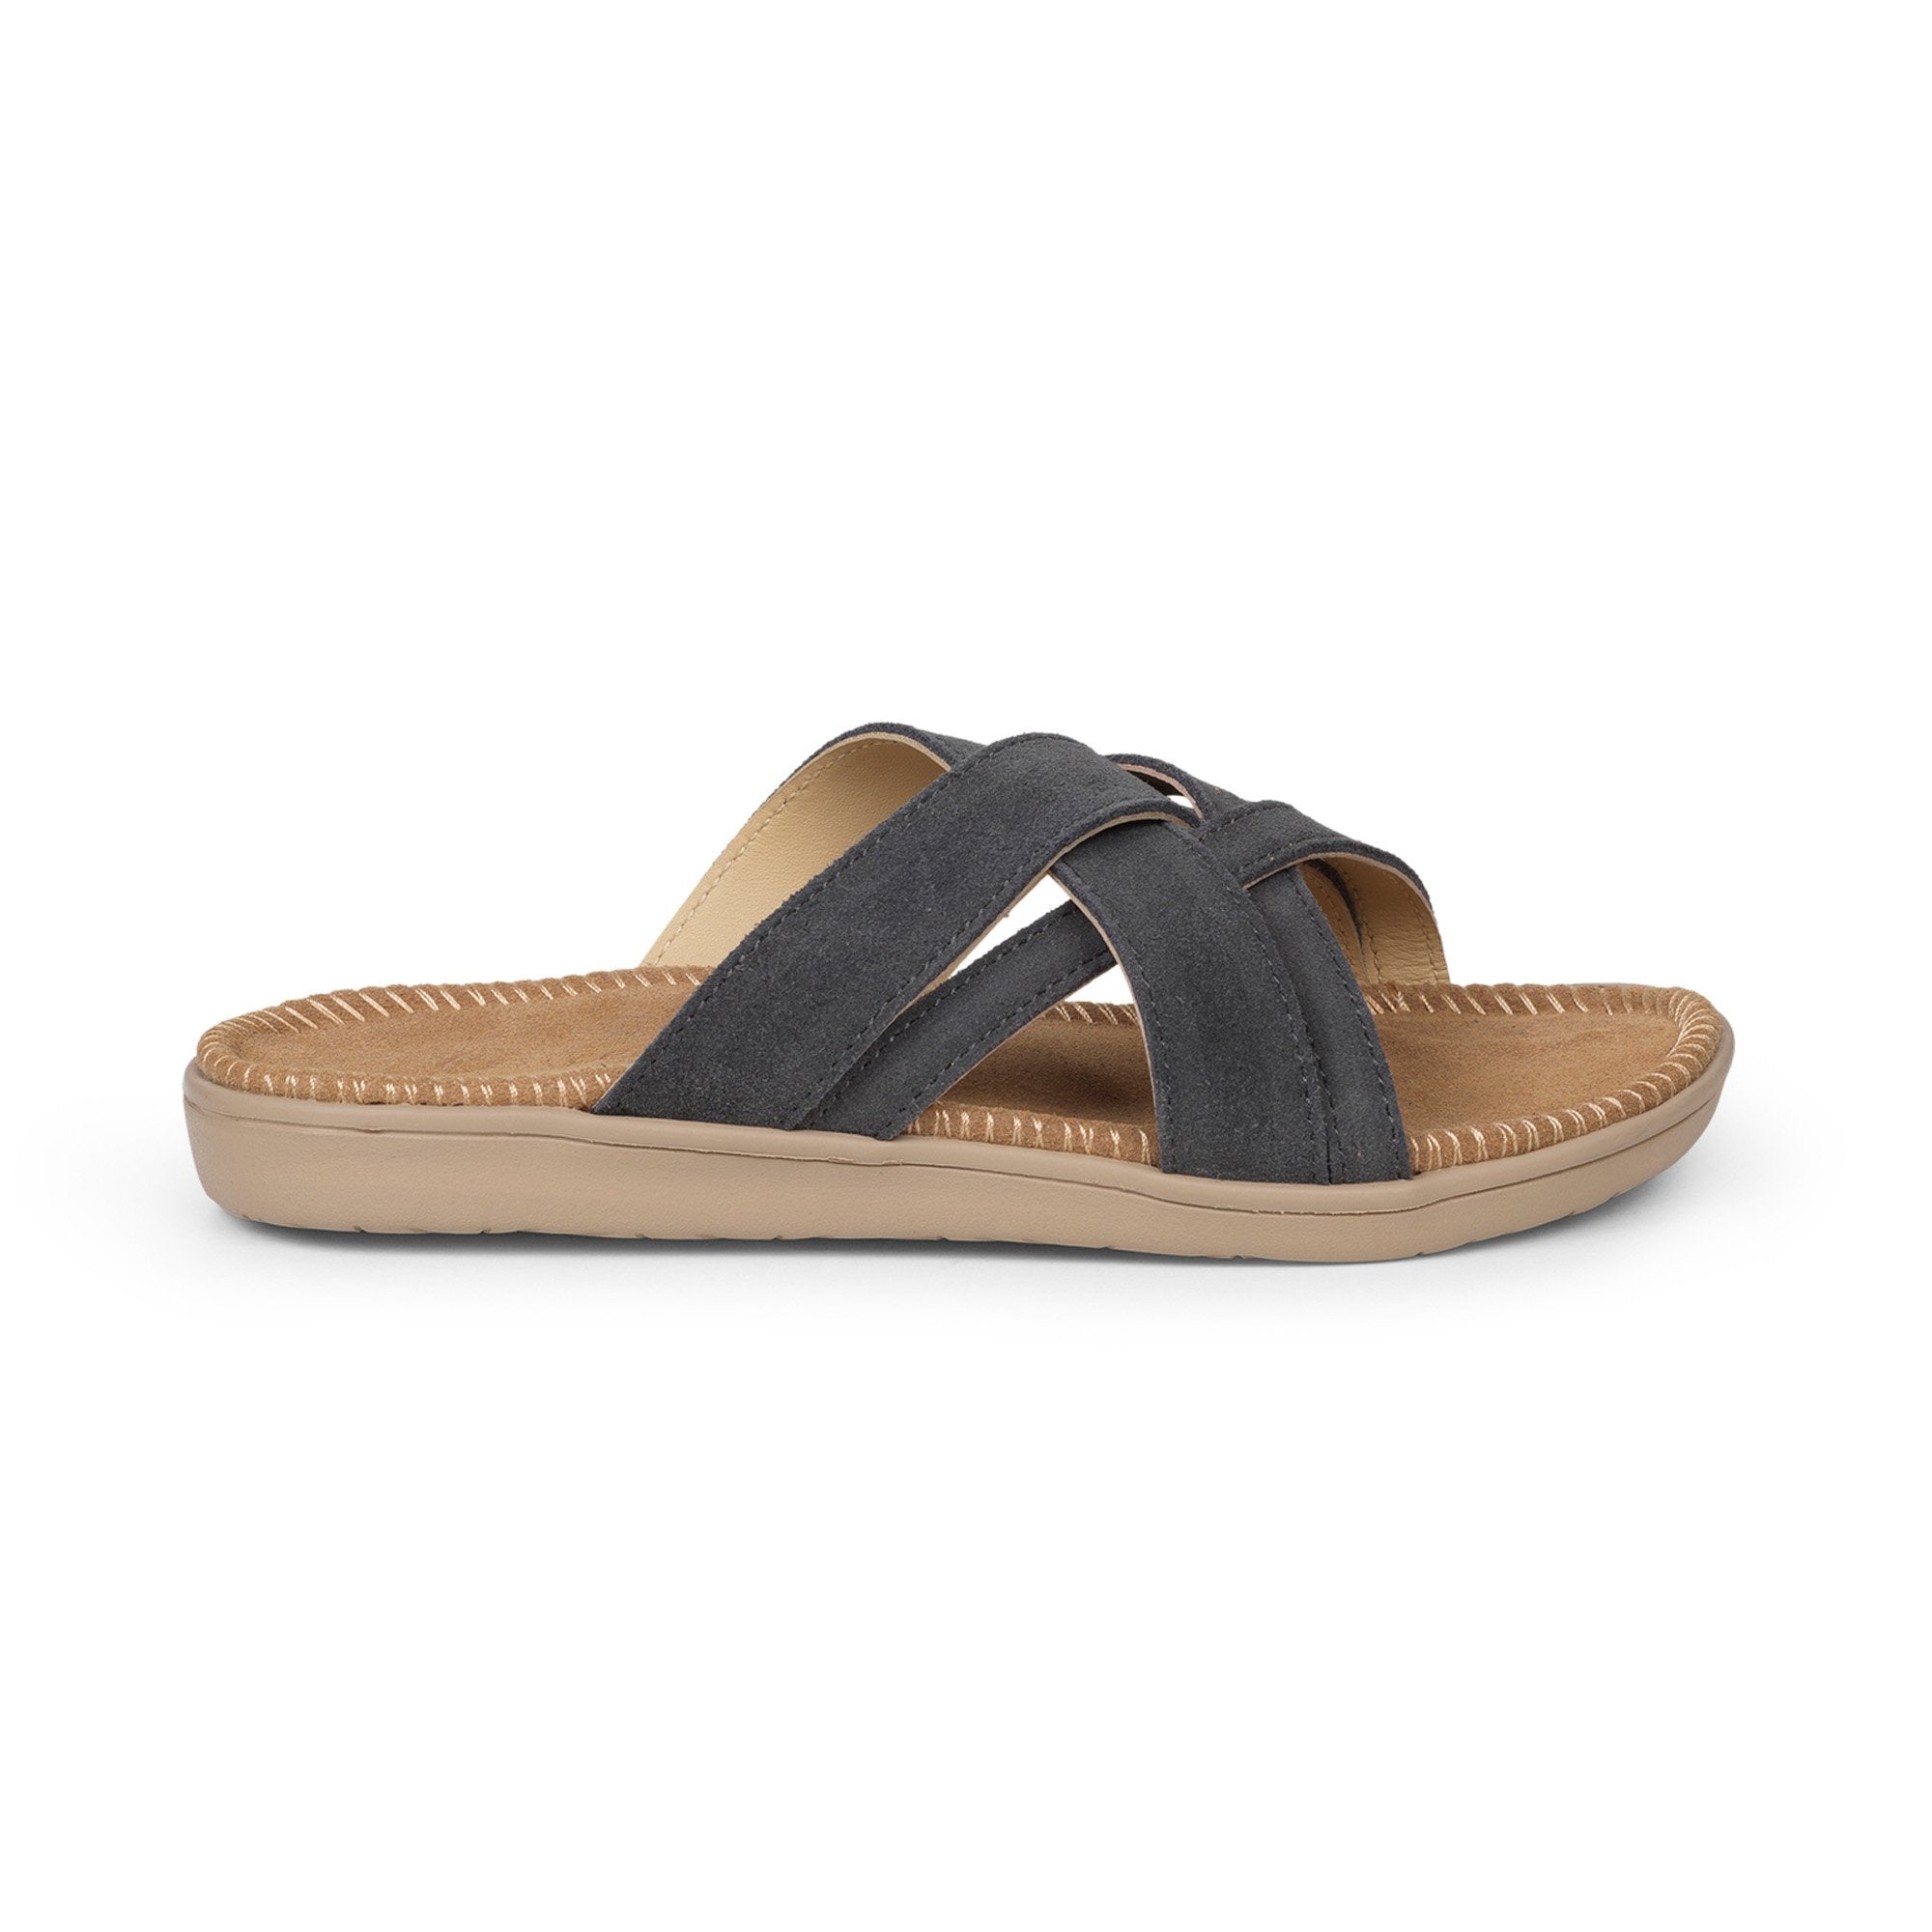 Sandals with straps of soft suede. The comfortable inner sole in covered with suede